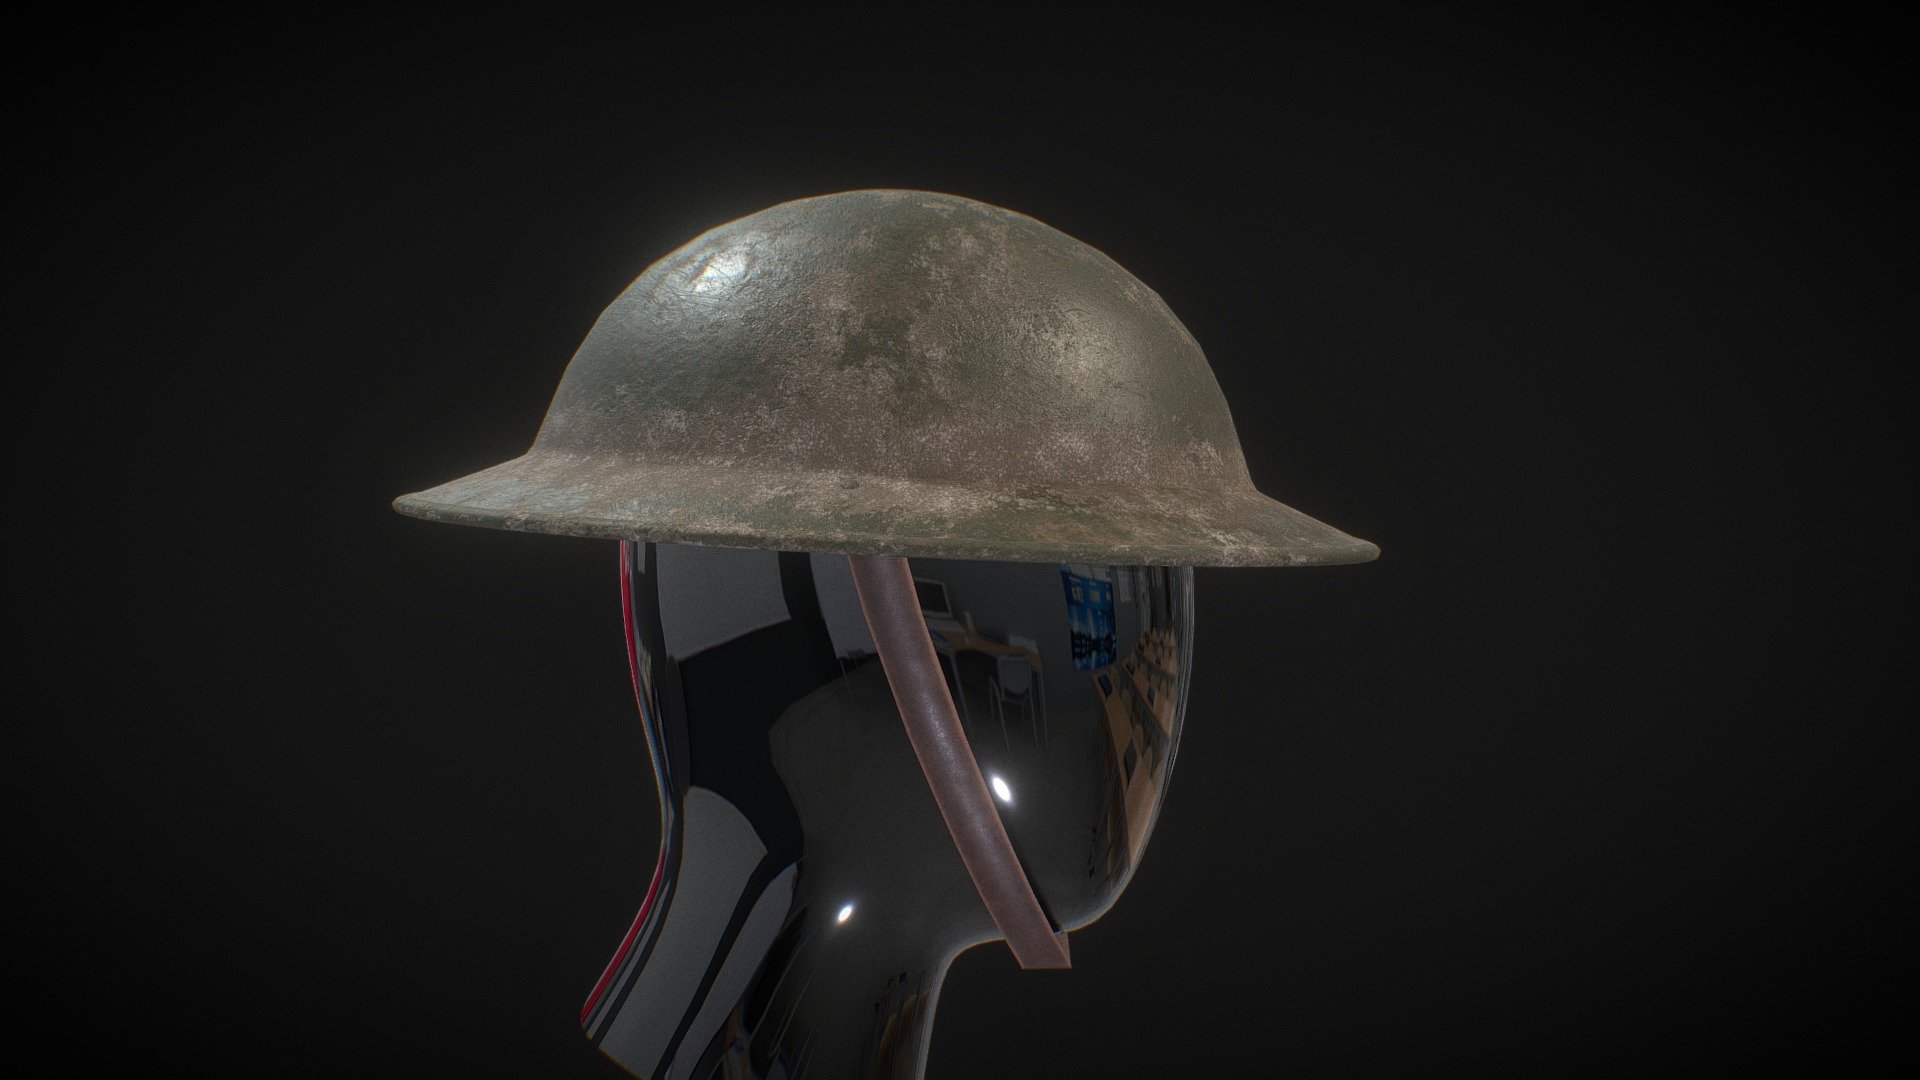 This helmet is optimized and ready to play.

The clean Version - https://skfb.ly/o9PPx

Cover Version - https://skfb.ly/oxCsQ

The Brodie helmet is a steel combat helmet designed and patented in London in 1915 by John Leopold Brodie. A modified form of it became the Helmet, Steel, Mark I in Britain and the M1917 Helmet in the US. Colloquially, it was called the shrapnel helmet, battle bowler, Tommy helmet, tin hat, and in the United States the doughboy helmet. It was also known as the dishpan hat, tin pan hat, washbasin, battle bowler (when worn by officers), and Kelly helmet. The German Army called it the Salatschüssel (salad bowl). The term Brodie is often misused. It is correctly applied only to the original 1915 Brodie’s Steel Helmet, War Office Pattern. https://en.wikipedia.org/wiki/Brodie_helmet - WWI British Helmet MK 1 "Brodie" (Dirty) - Buy Royalty Free 3D model by Davicolt 3d model